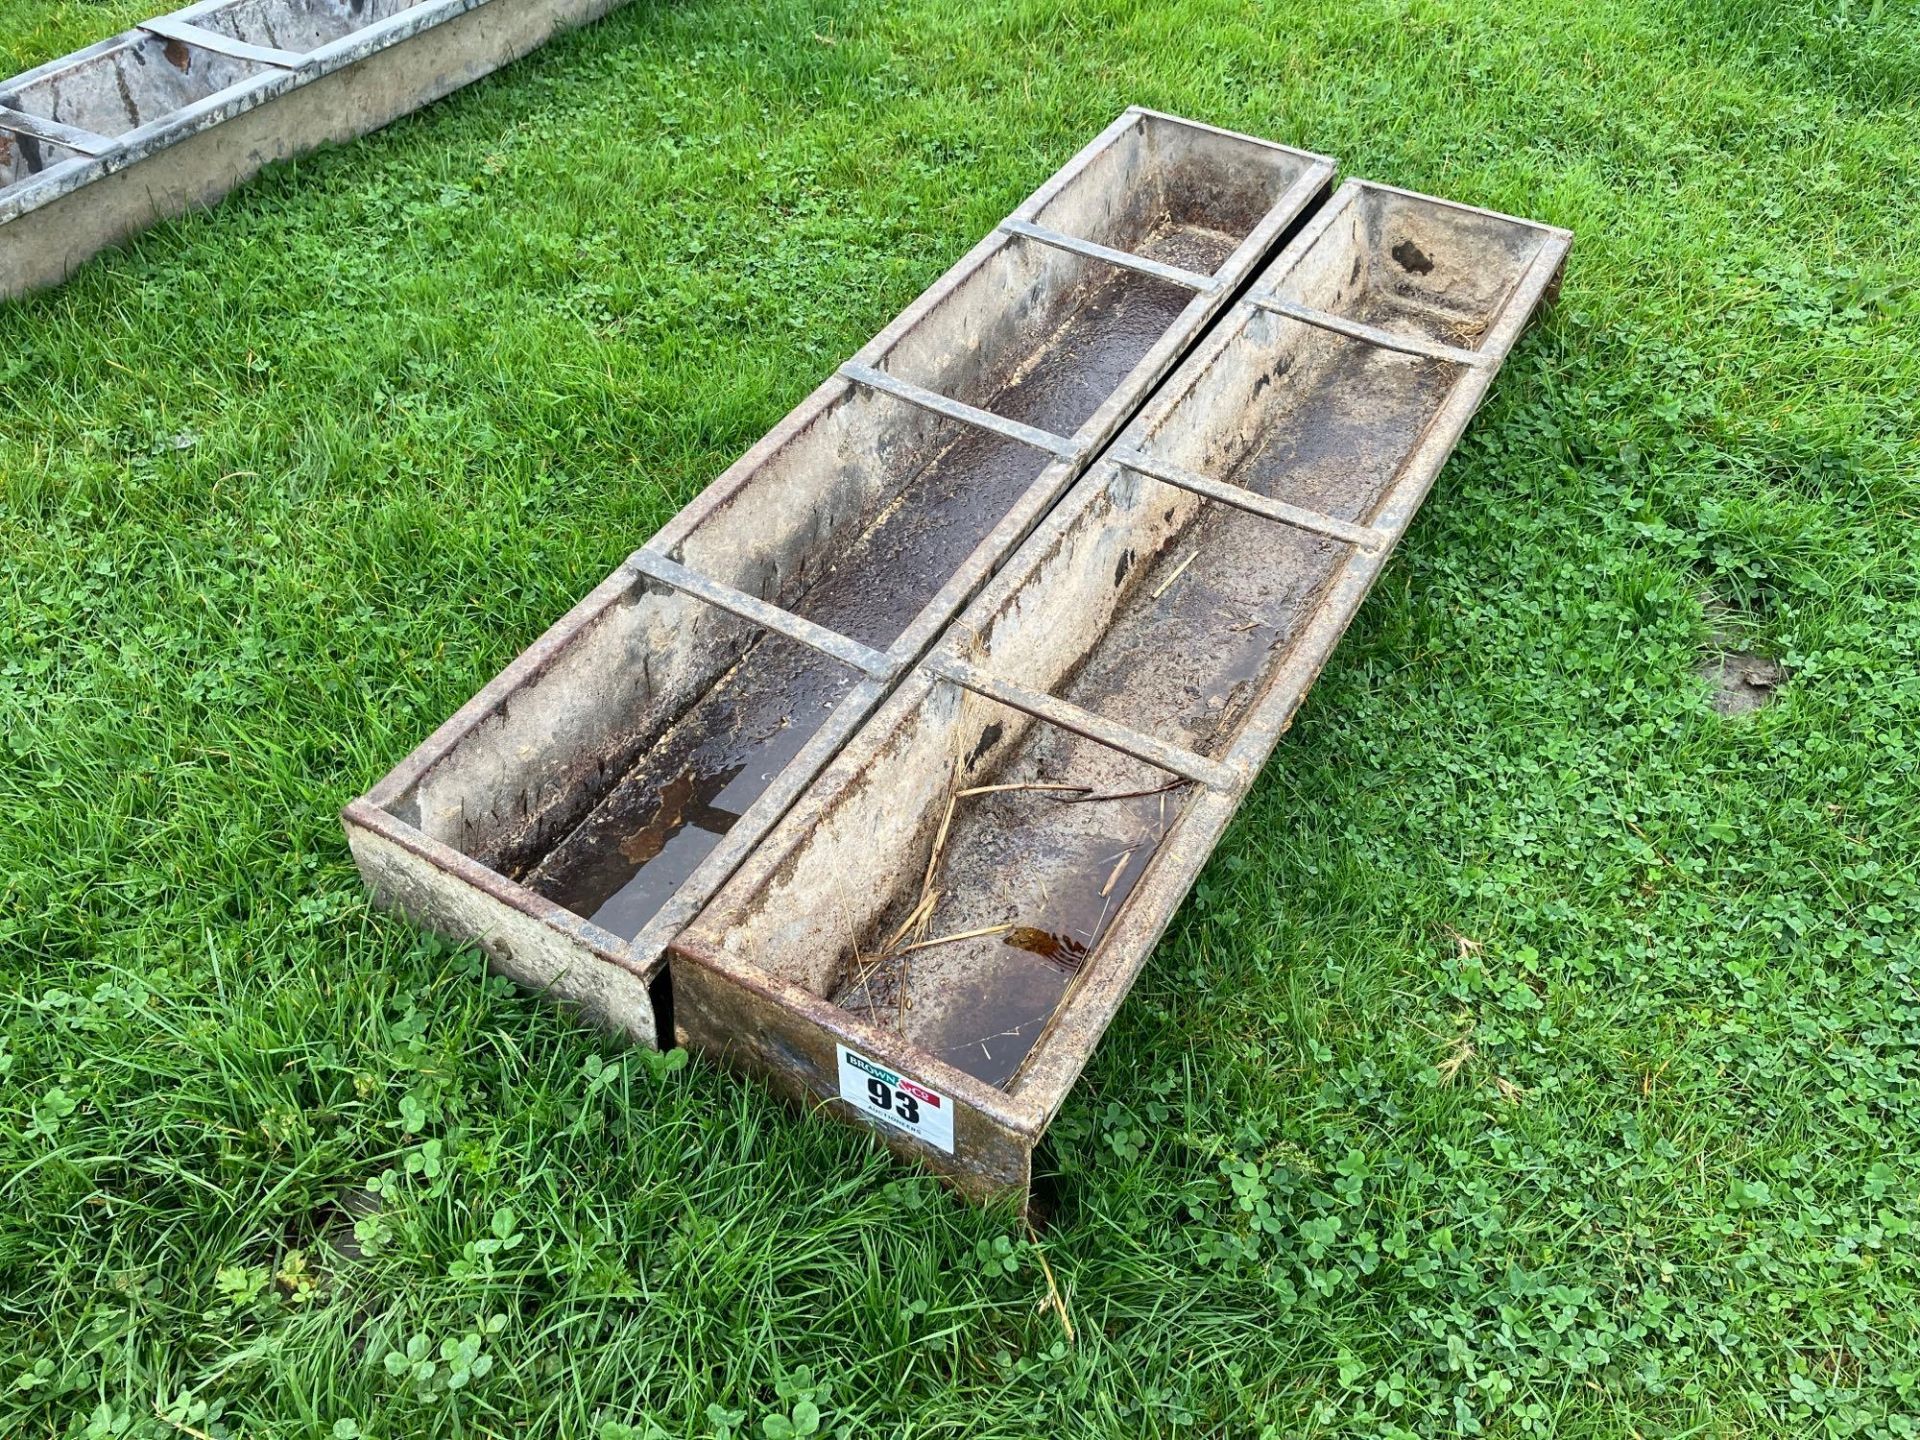 2No galvanised feed troughs, 4.5ft